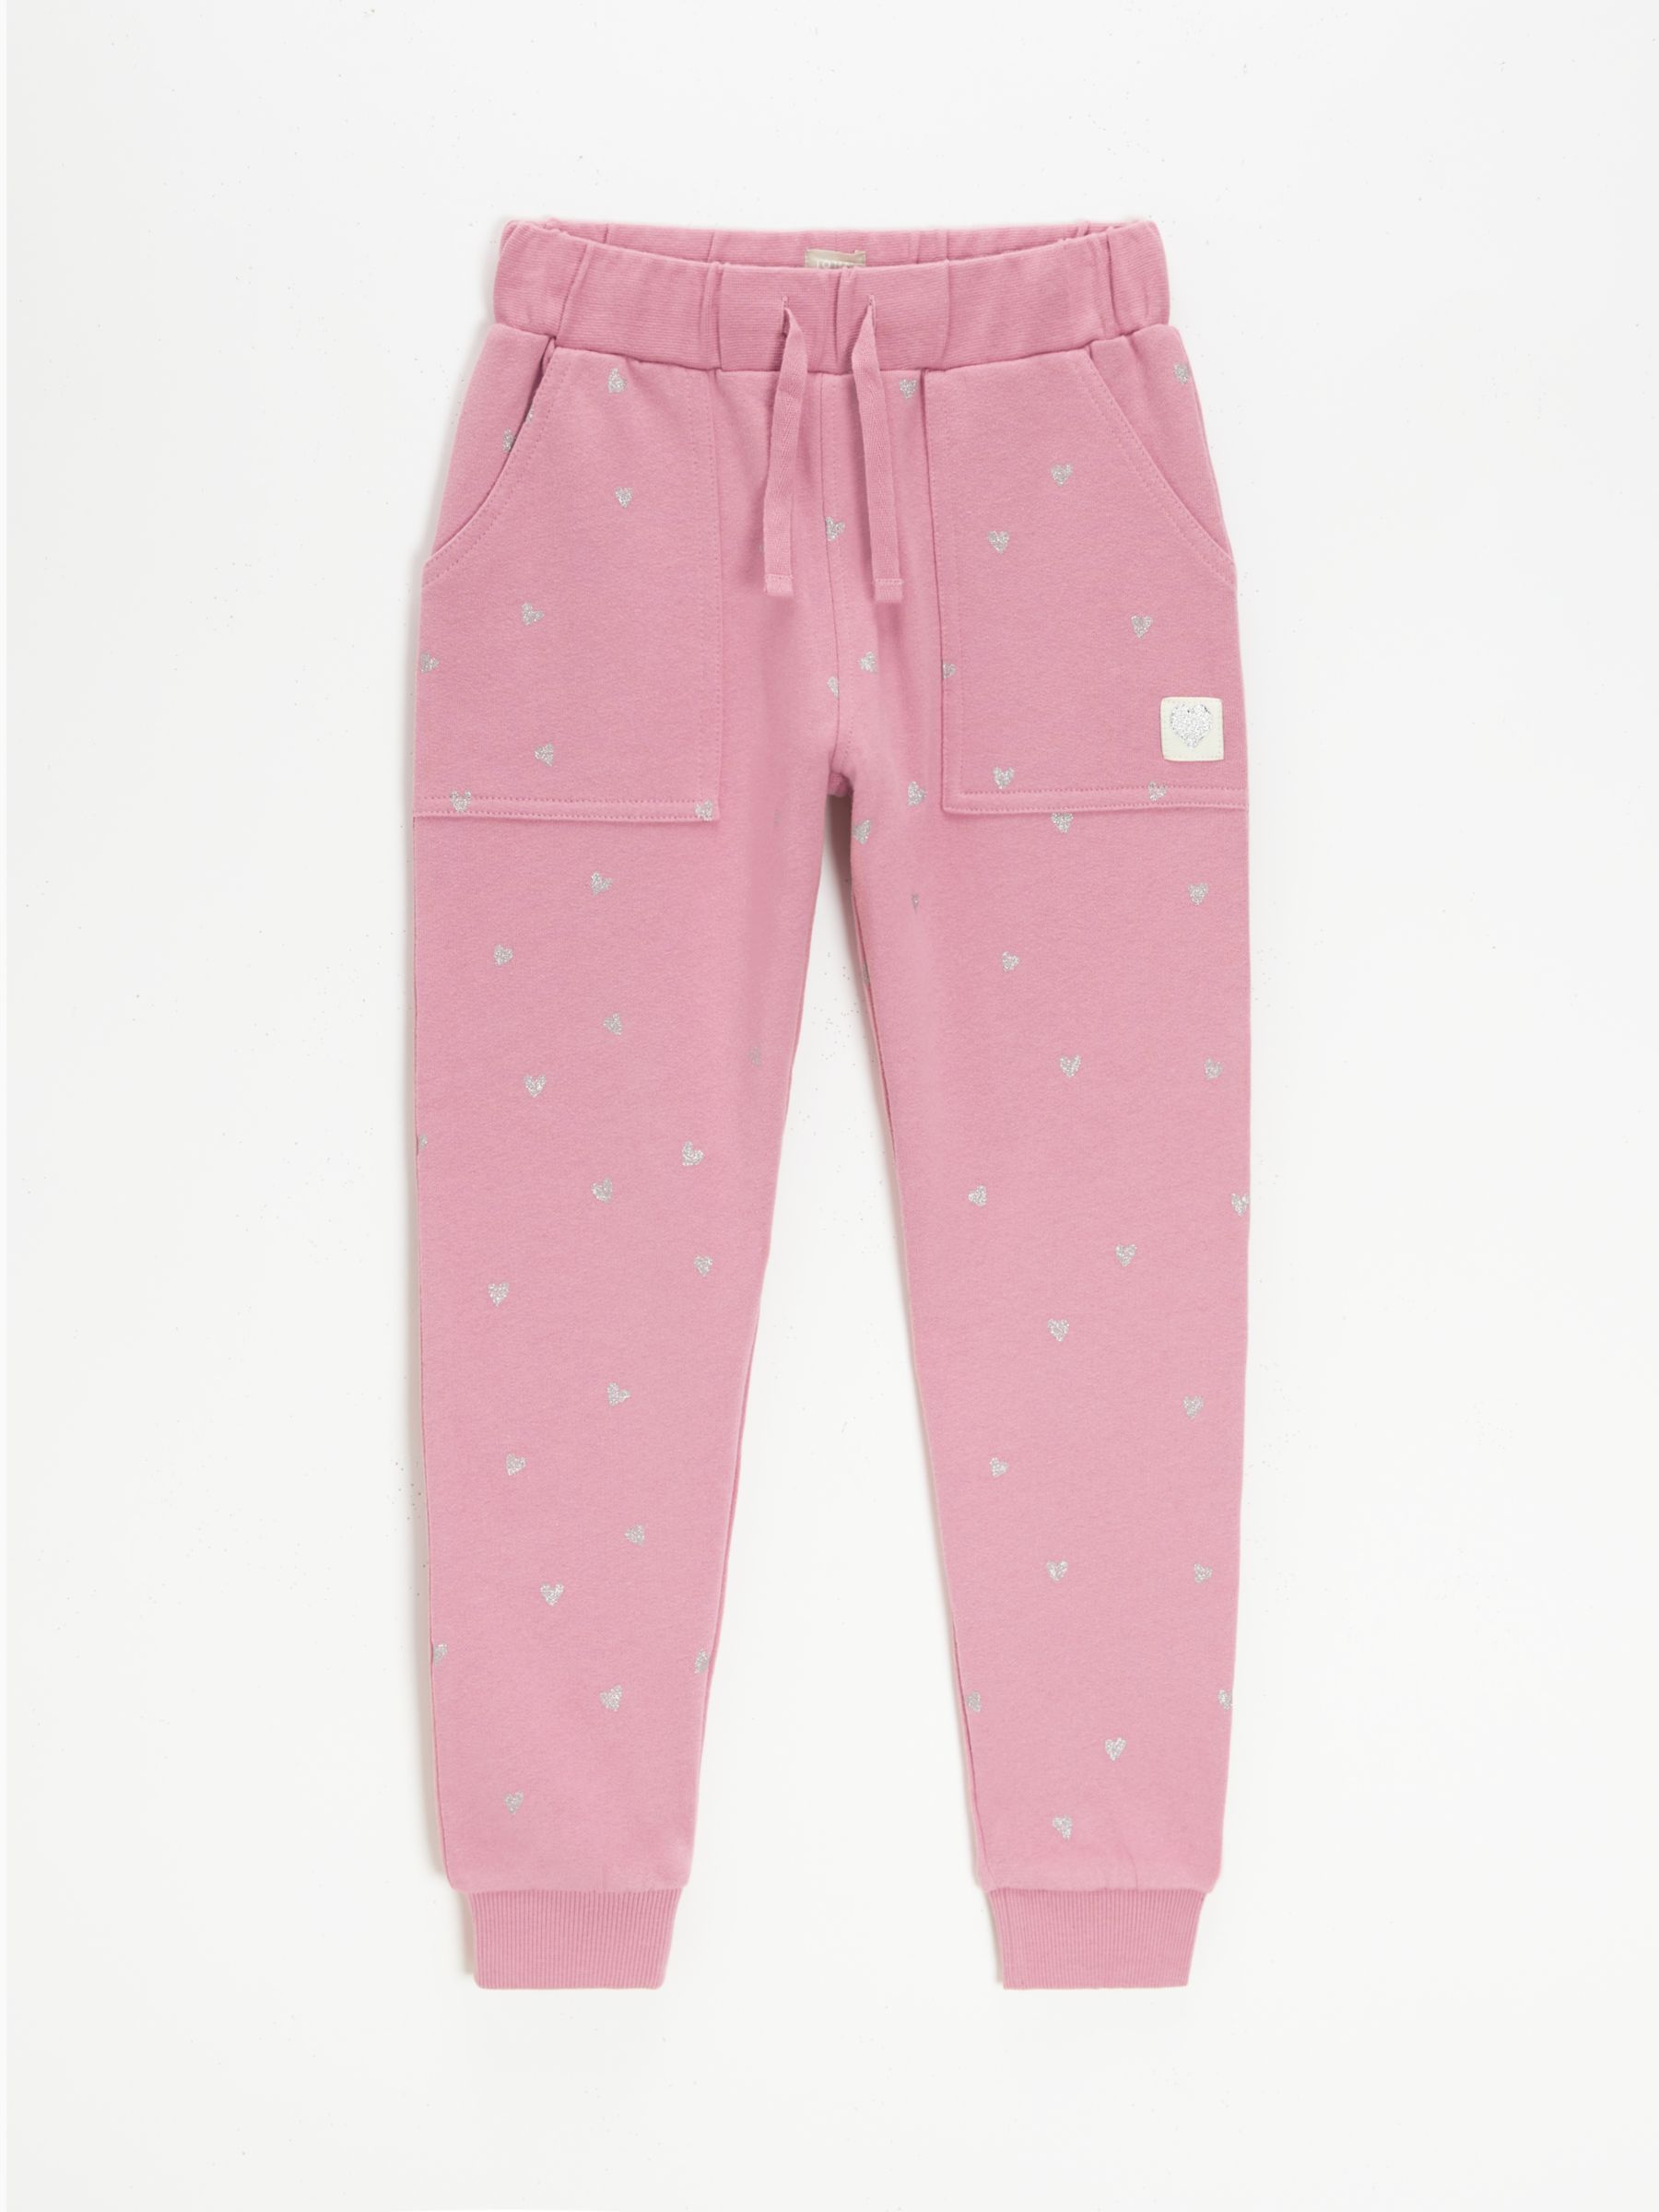 The ALL OVER HEART Little Babes Jogger